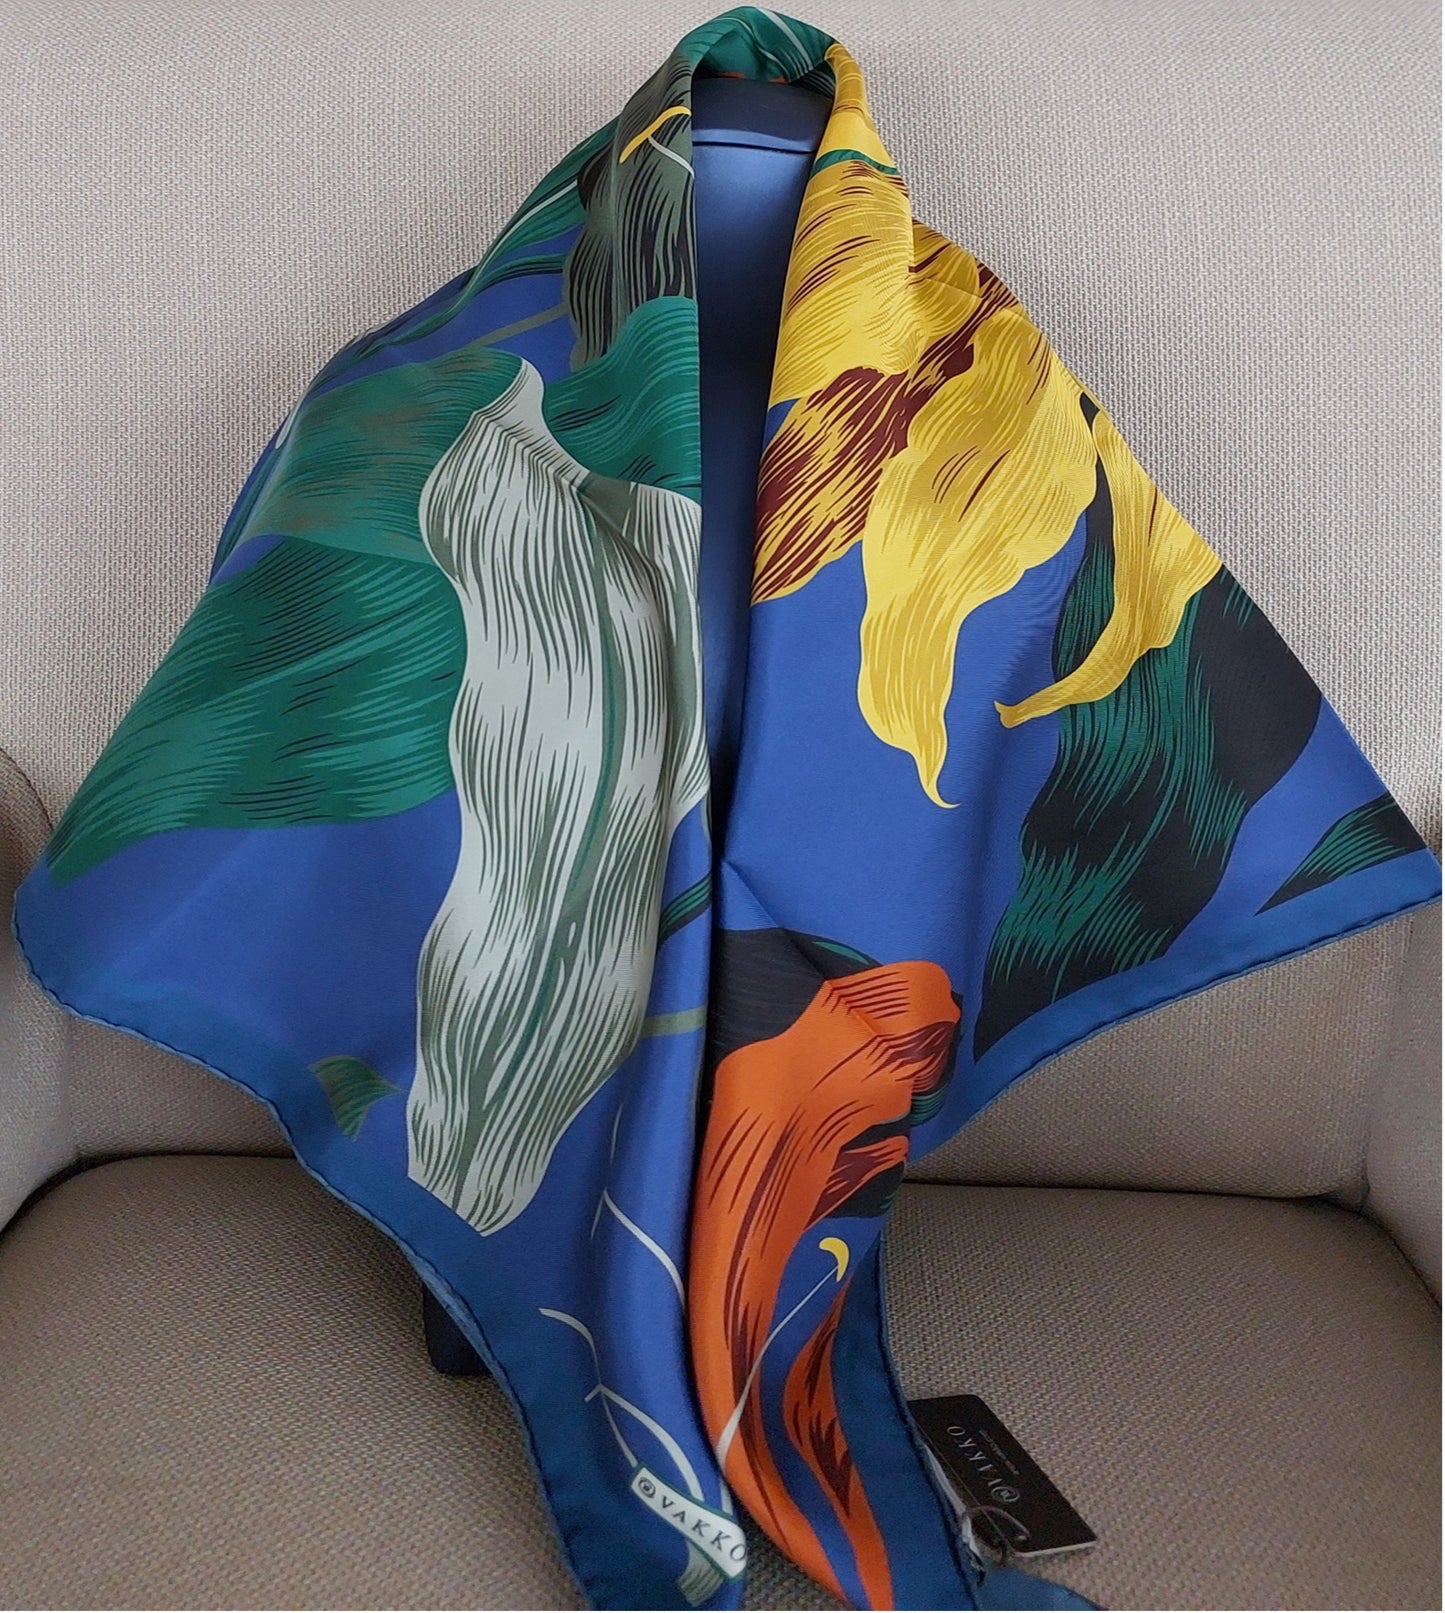 Woman Scarf 100% Silk Twill 90x90 Big Flowers Design Blue Green Colors Hand-rolled Great Gift for Her